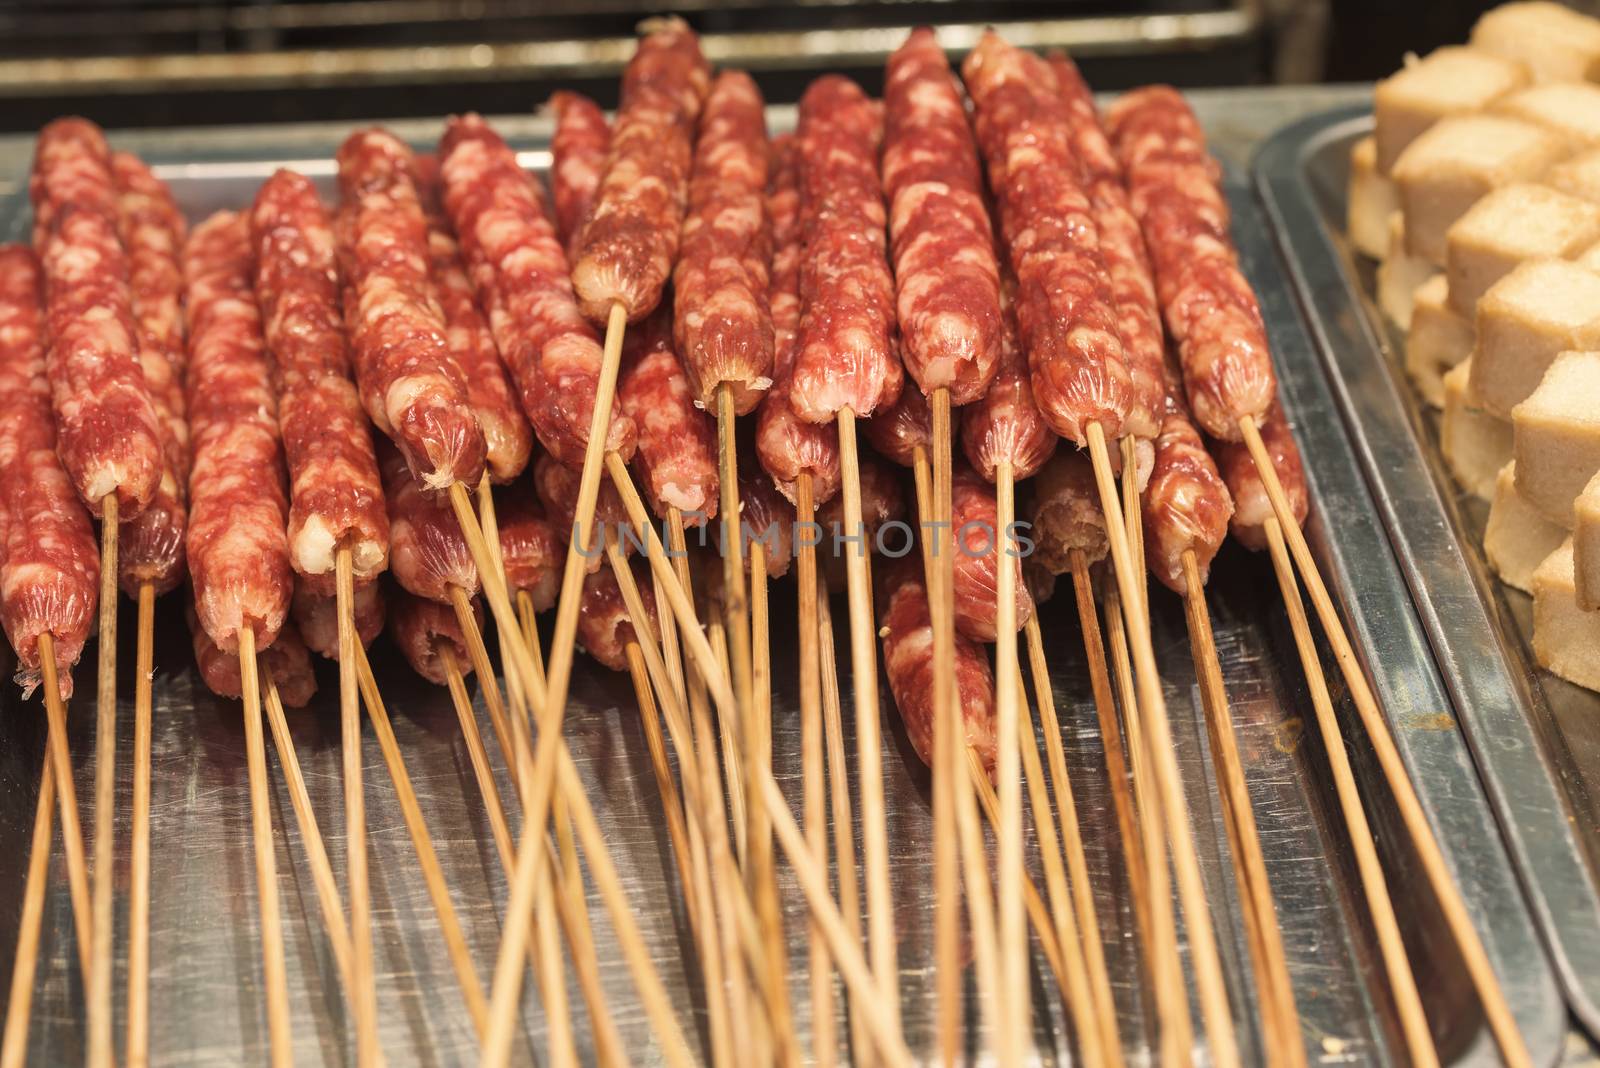 Street food asia. Meat on a stick. Chinese street food